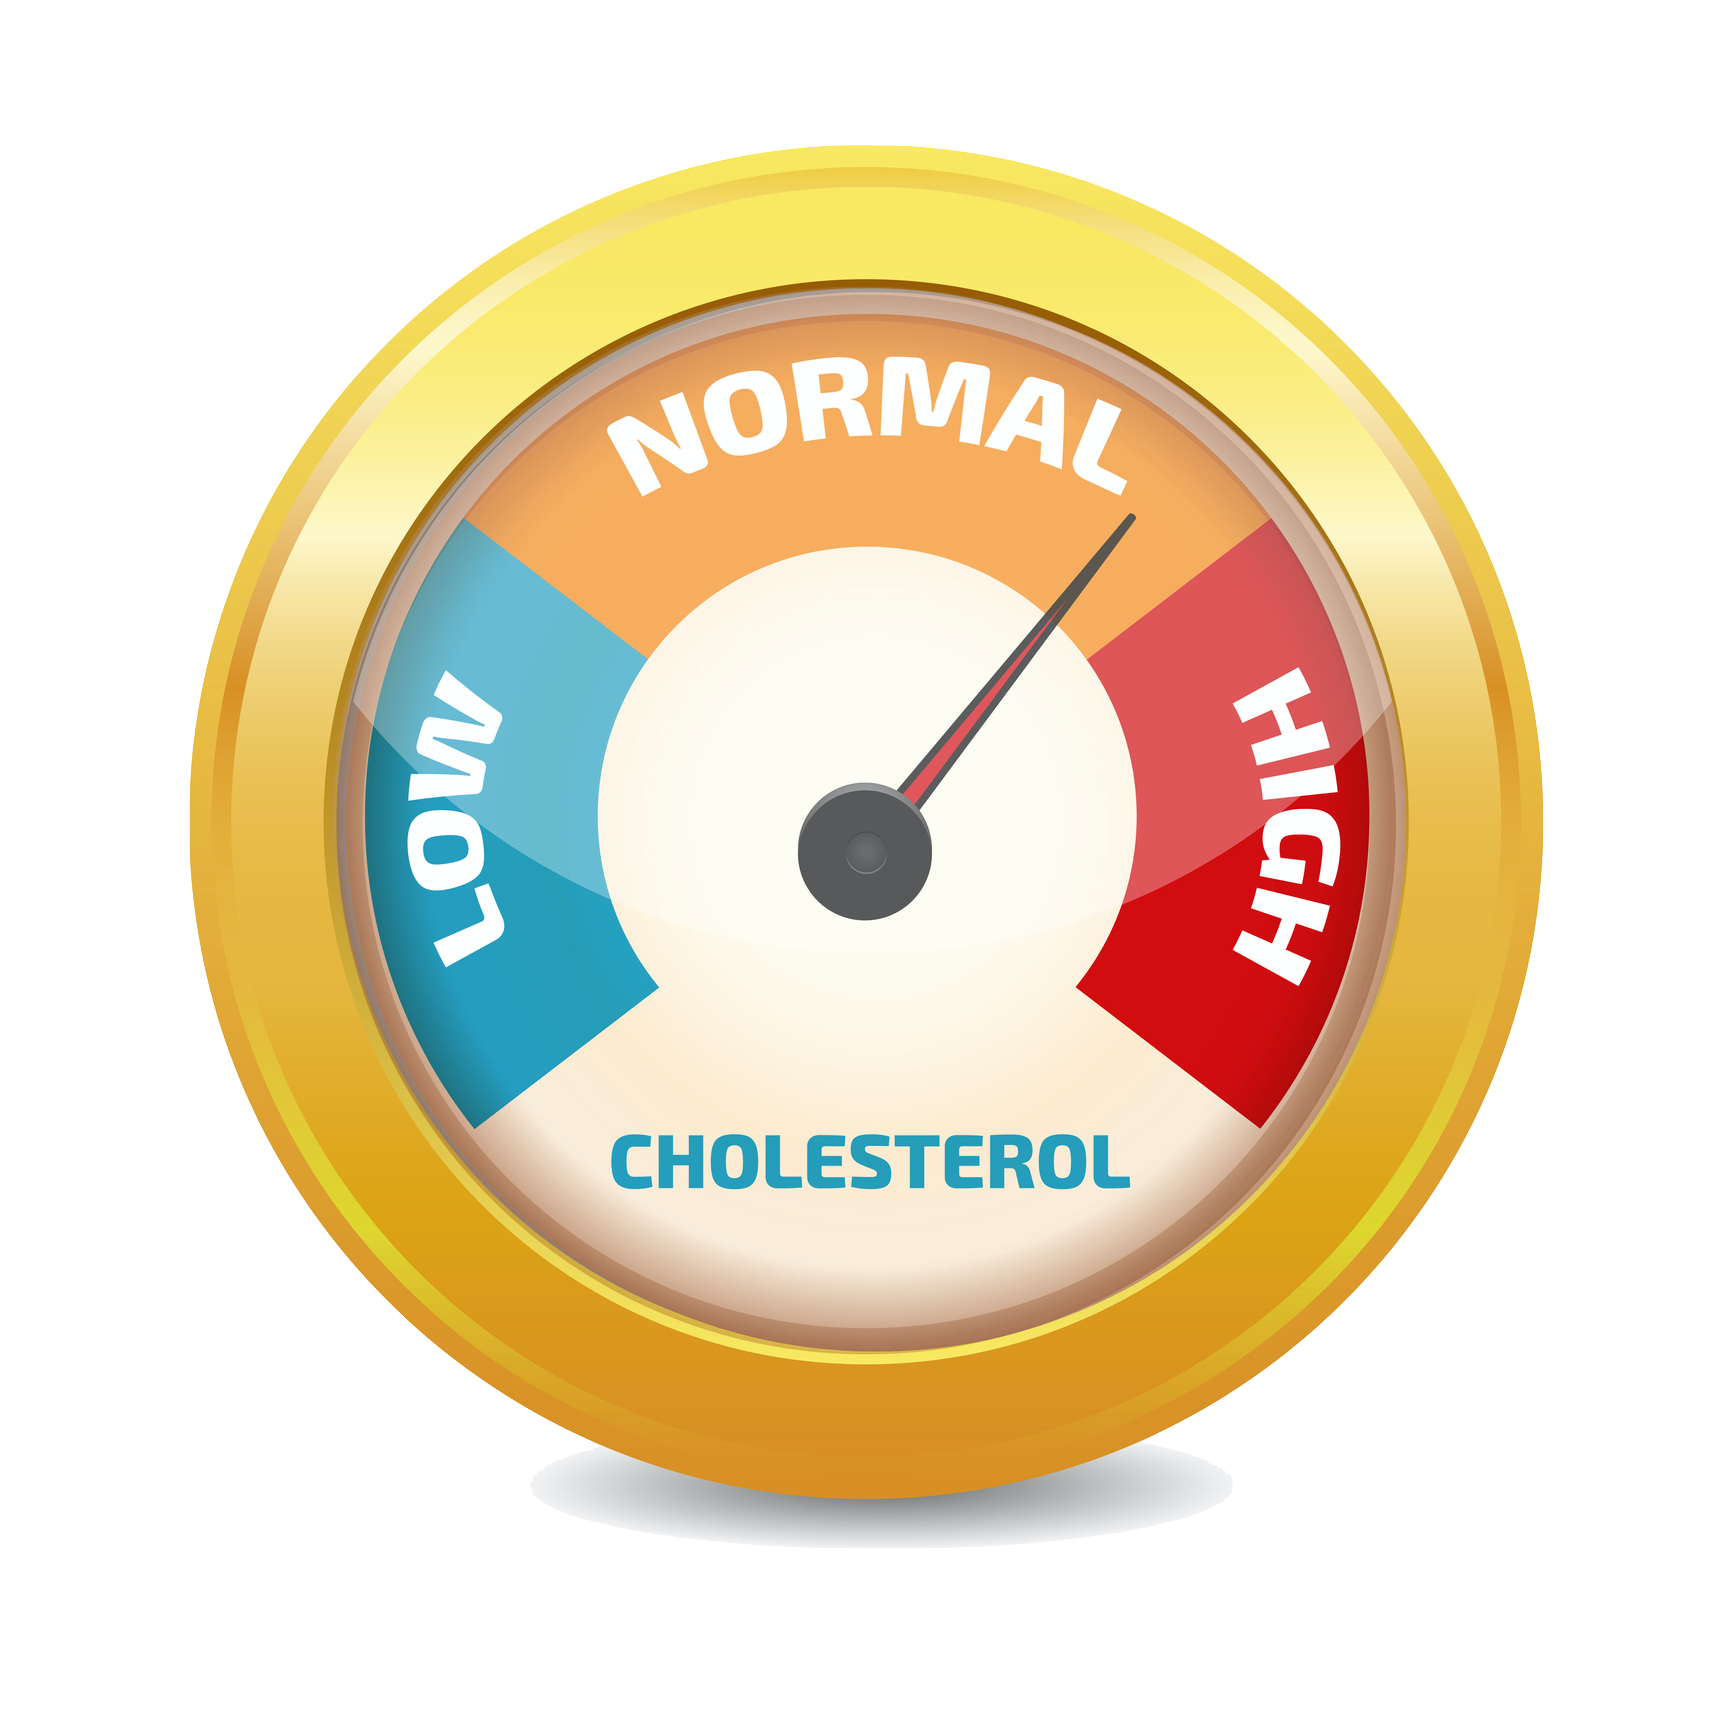 Cholesterol screening image_meter showing low normal and high copy